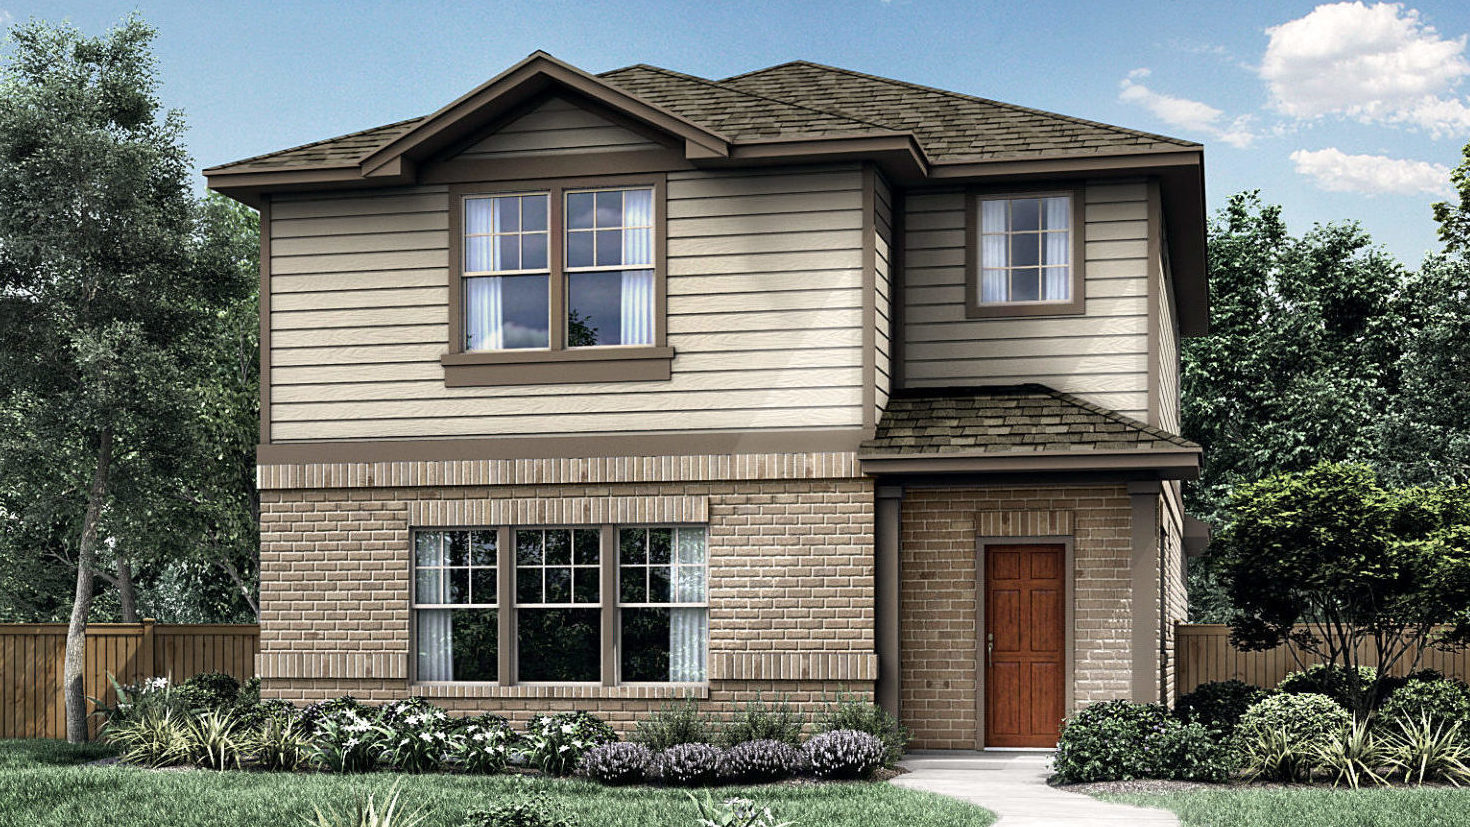 The Franklin Elevation A With Masonry Saddle Creek New Homes in Georgetown